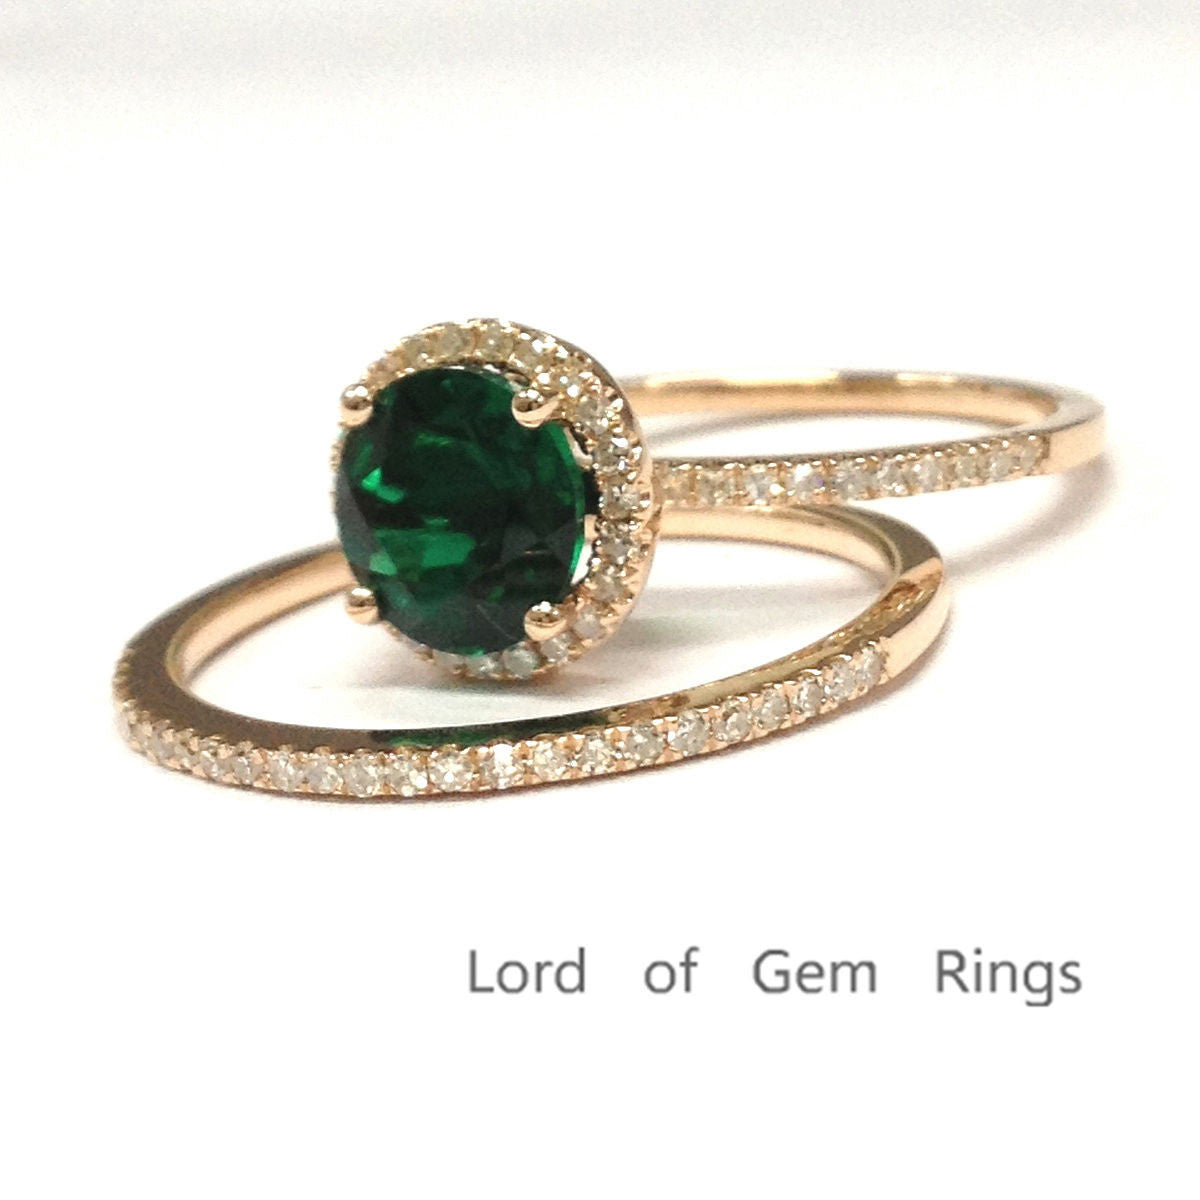 Round Emerald Engagement Ring Sets Pave Diamond Wedding 14k Rose Gold 7mm - Lord of Gem Rings - 2